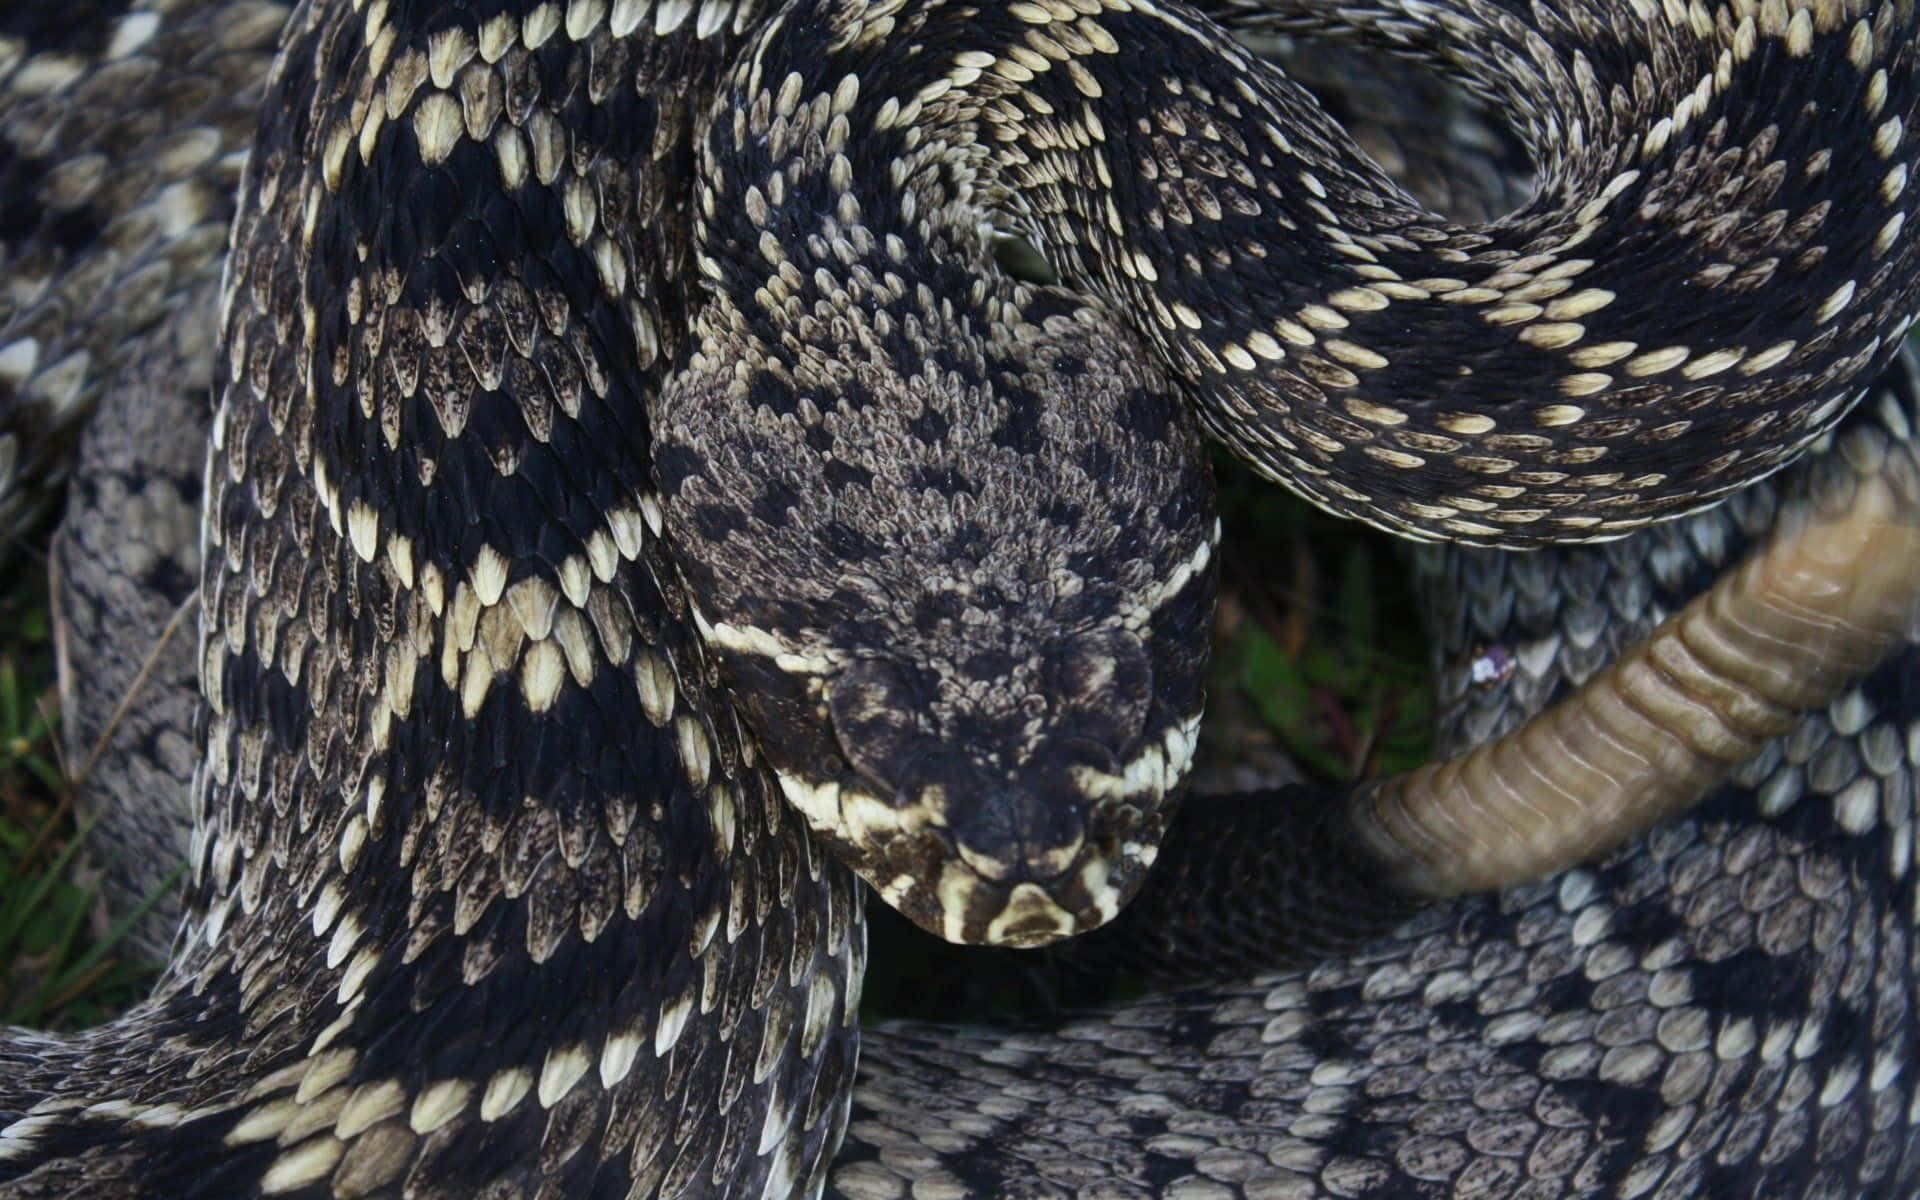 Rattlesnake coiled and ready to strike